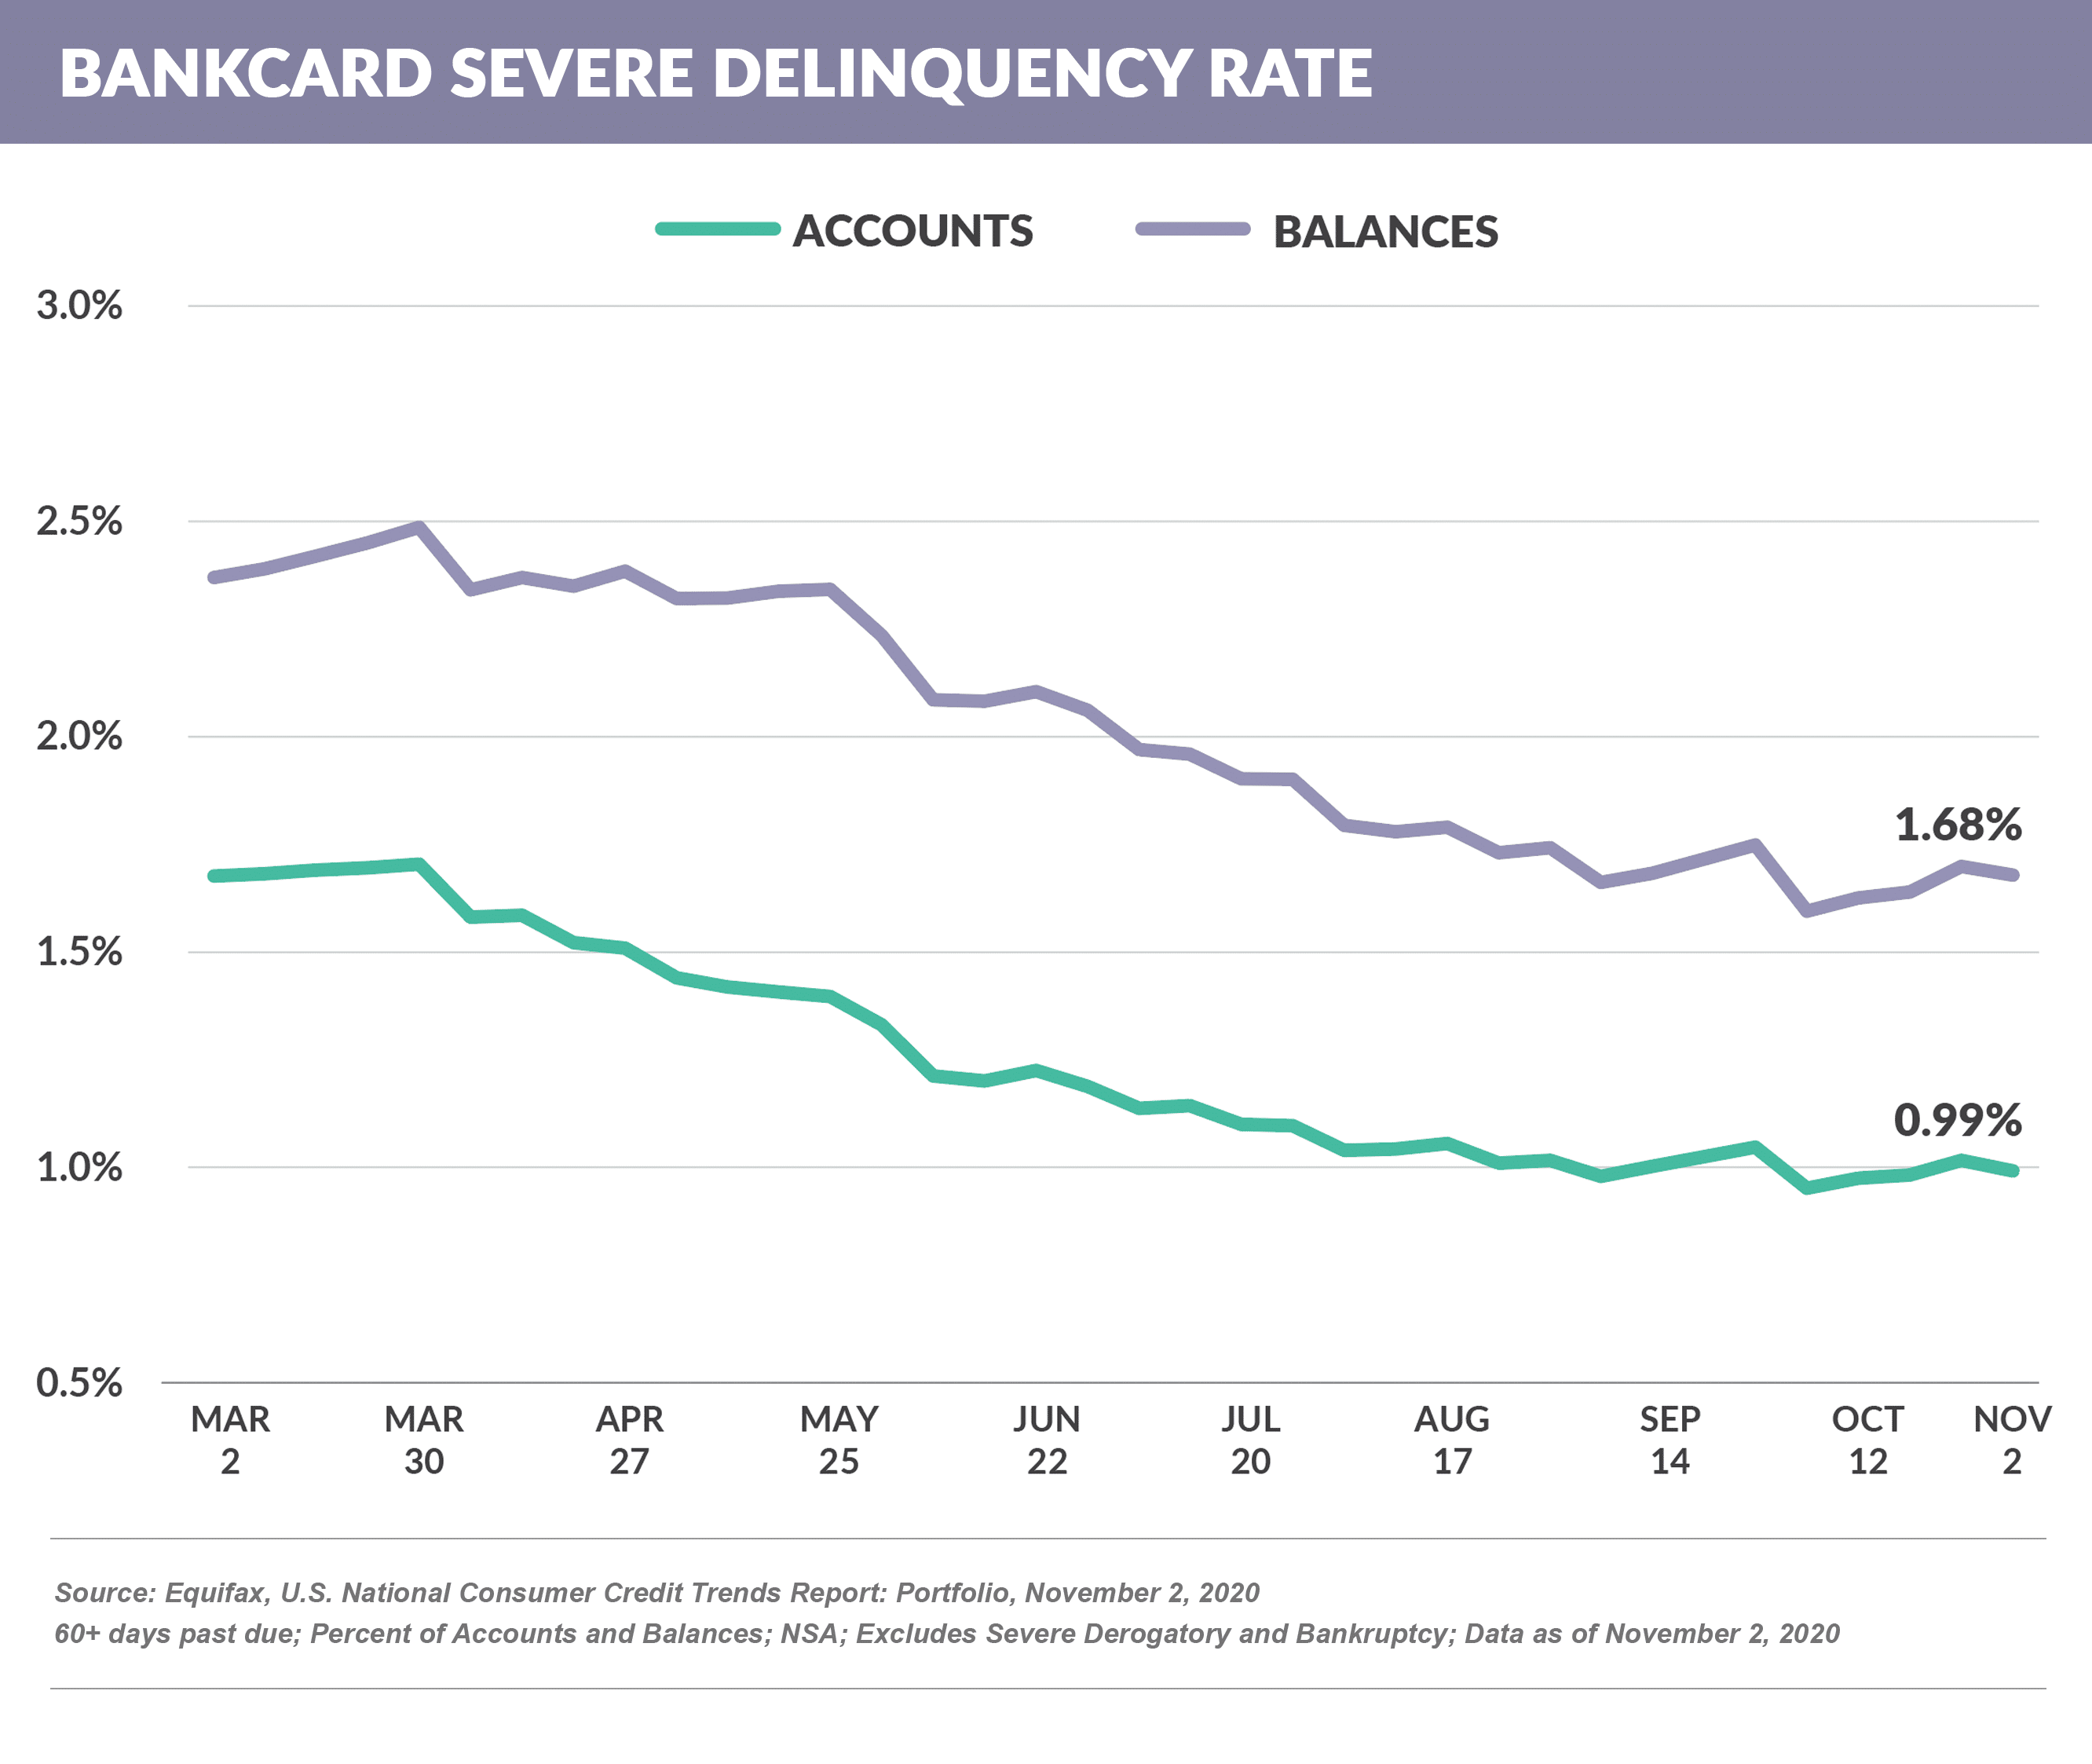 Bankcard Severe Delinquency Rate